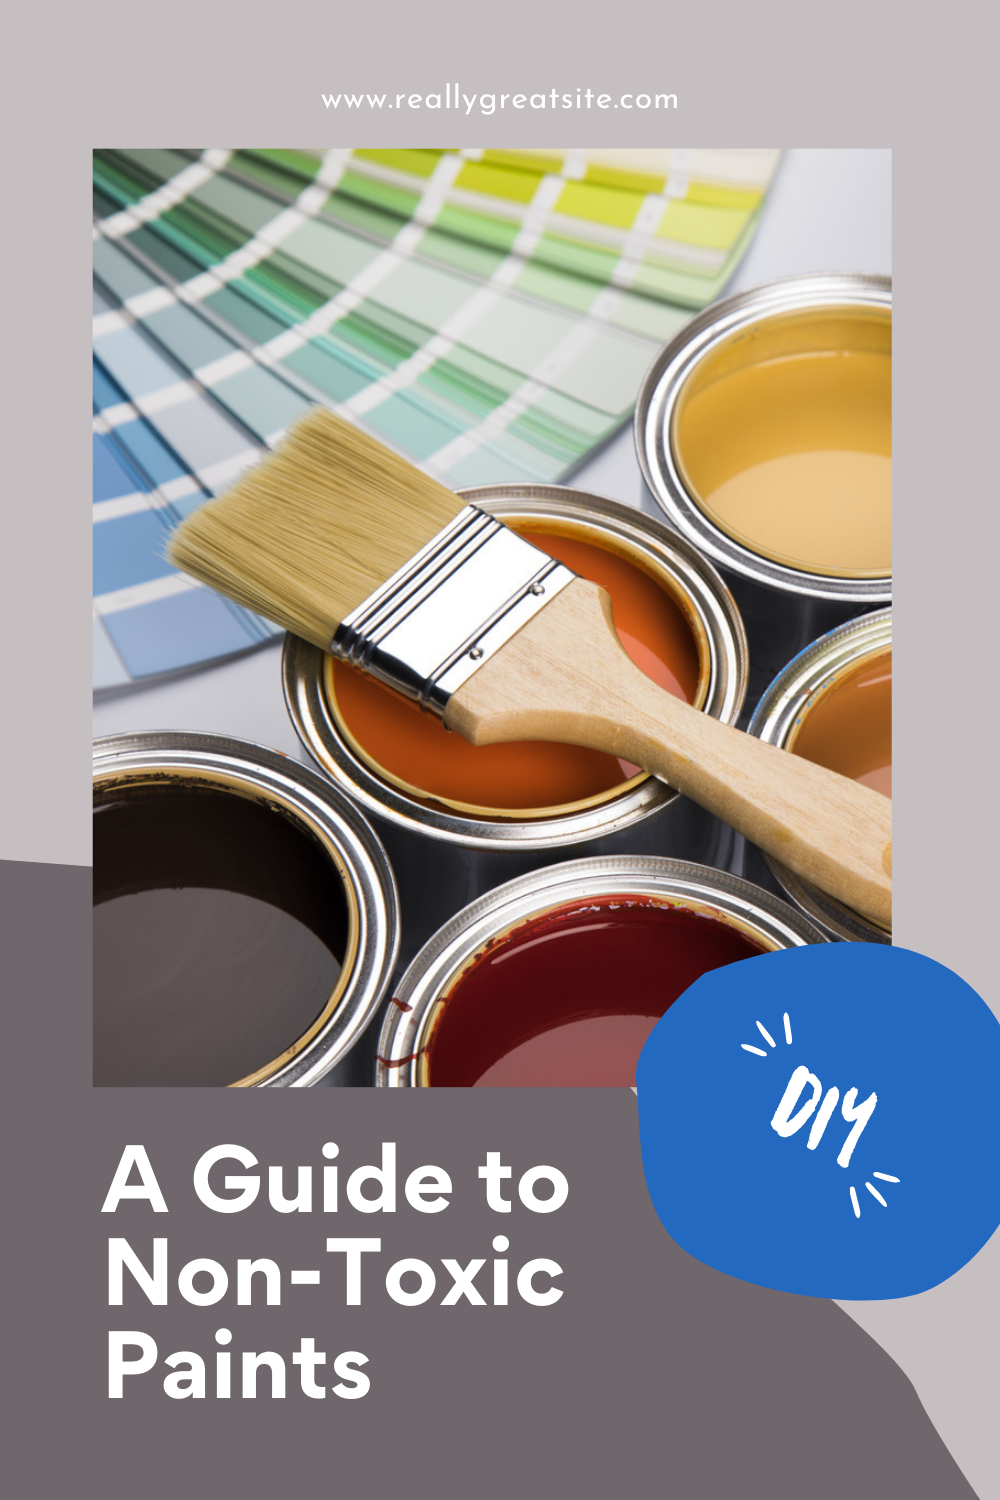 A Guide to Non-Toxic Paints